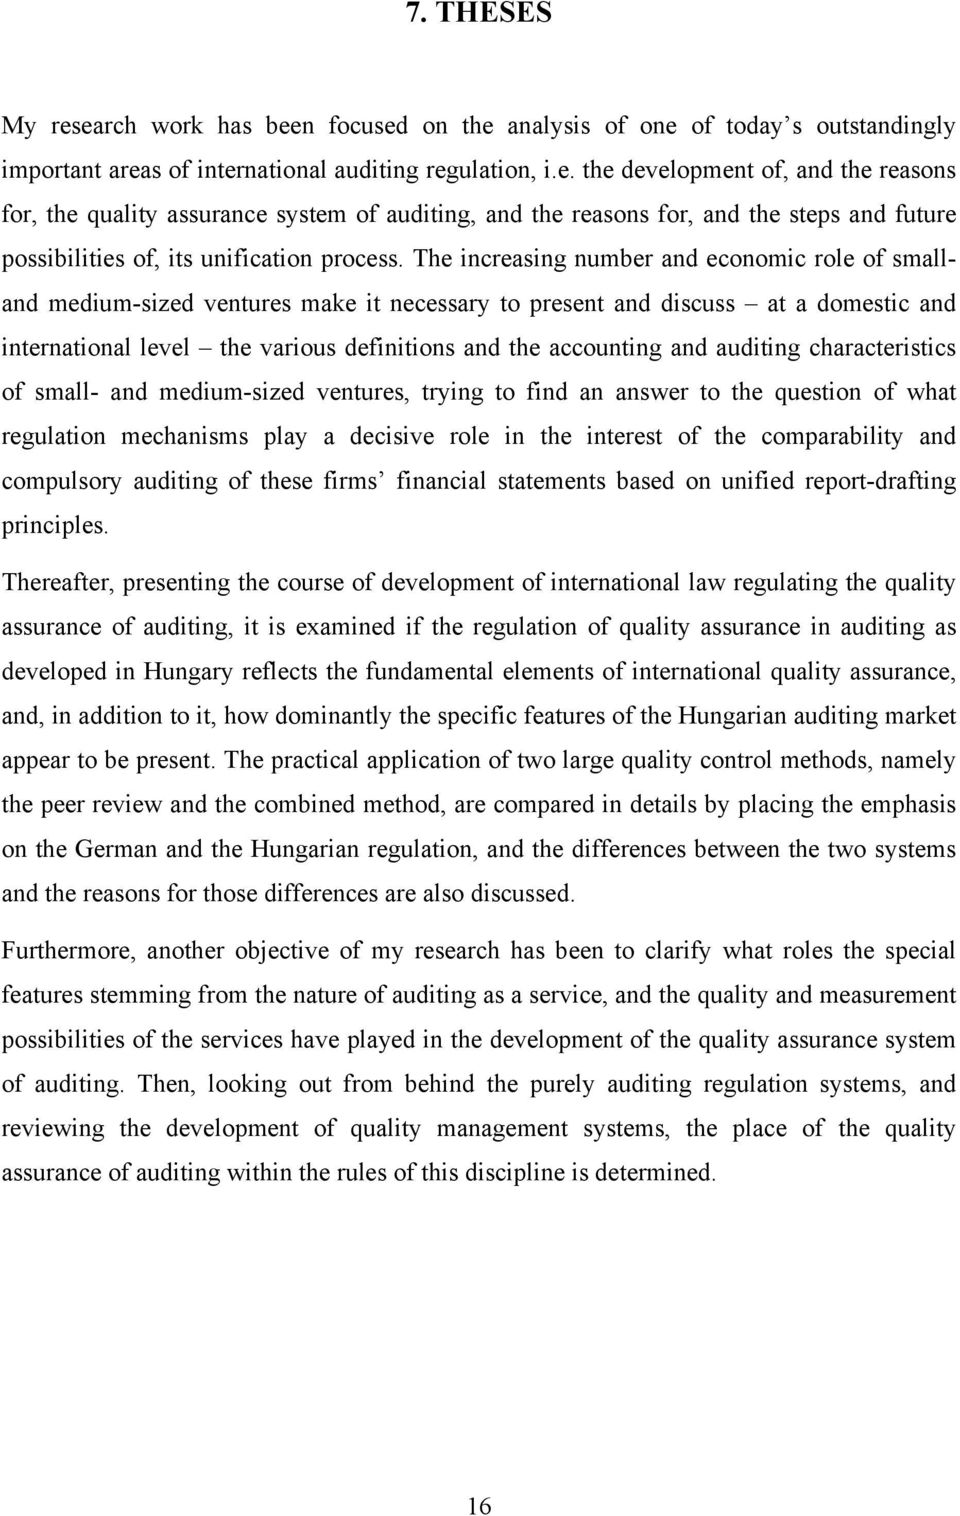 auditing characteristics of small- and medium-sized ventures, trying to find an answer to the question of what regulation mechanisms play a decisive role in the interest of the comparability and